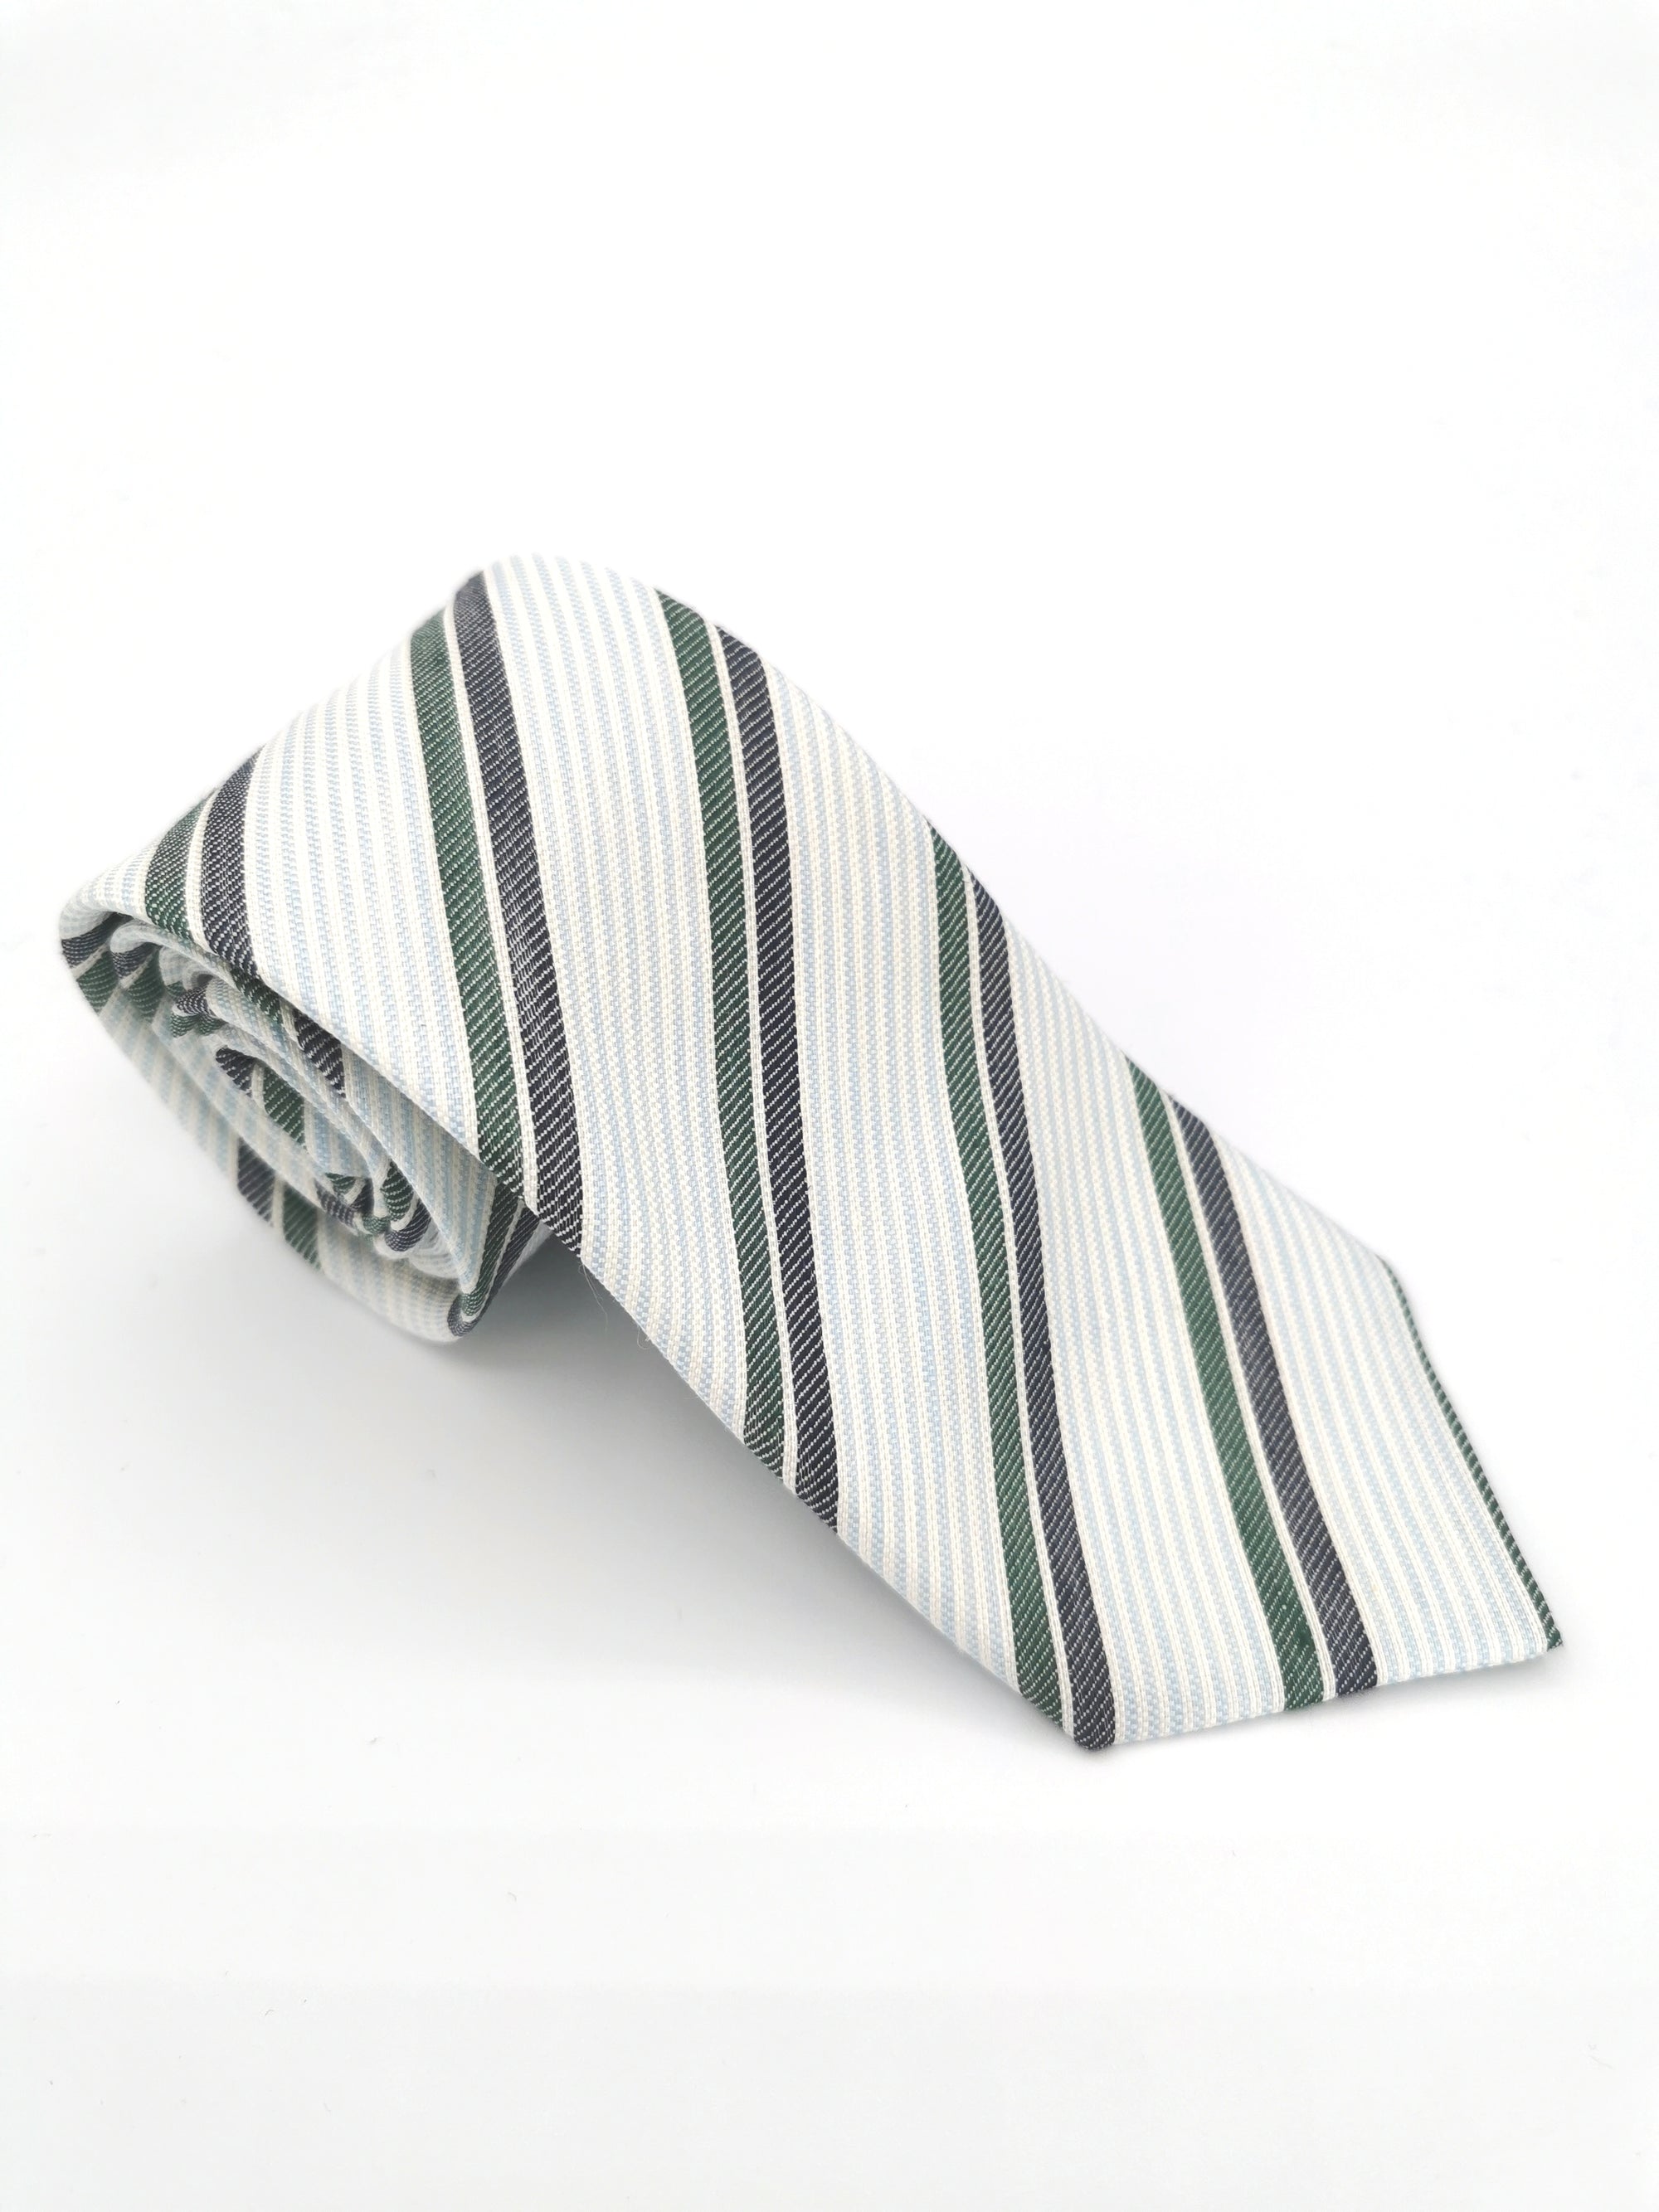 Ferala tie in white silk with gray and green stripes